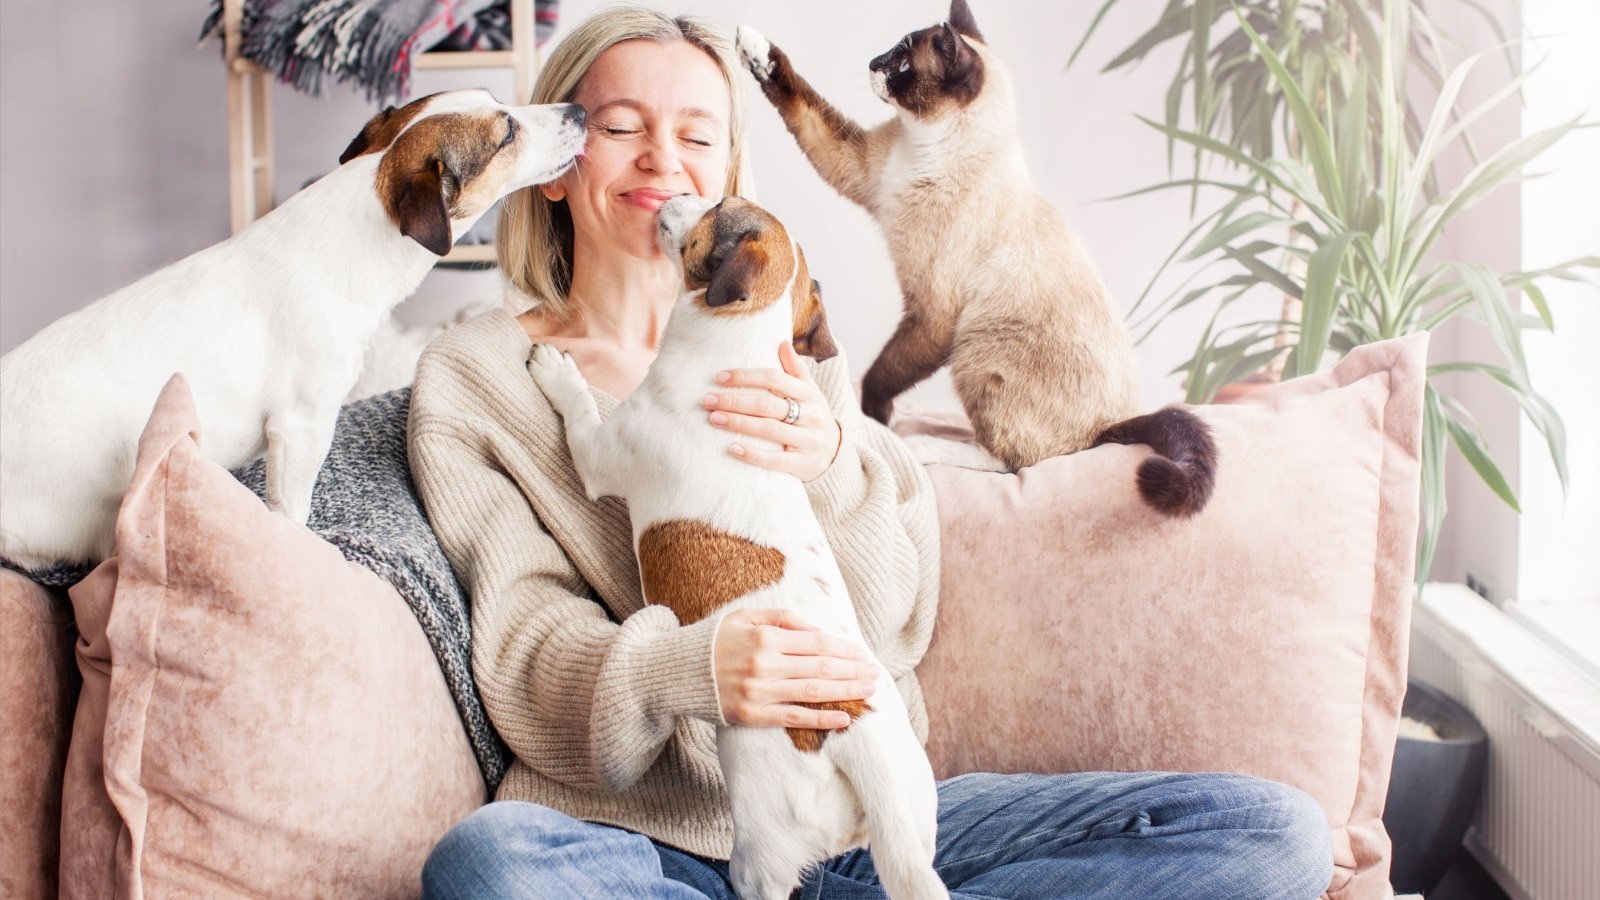 <p><span>Taking care of someone’s home and pets while they are away is a mutually beneficial arrangement for people who want to travel. </span></p><p><span>Through sites like TrustedHousesitters, you can find house-sitting gigs worldwide that provide free accommodation in exchange for your services. This allows you to live like a local and affordably immerse yourself in new destinations. Get reviews from previous house-sitting jobs to build trust with homeowners.</span></p>